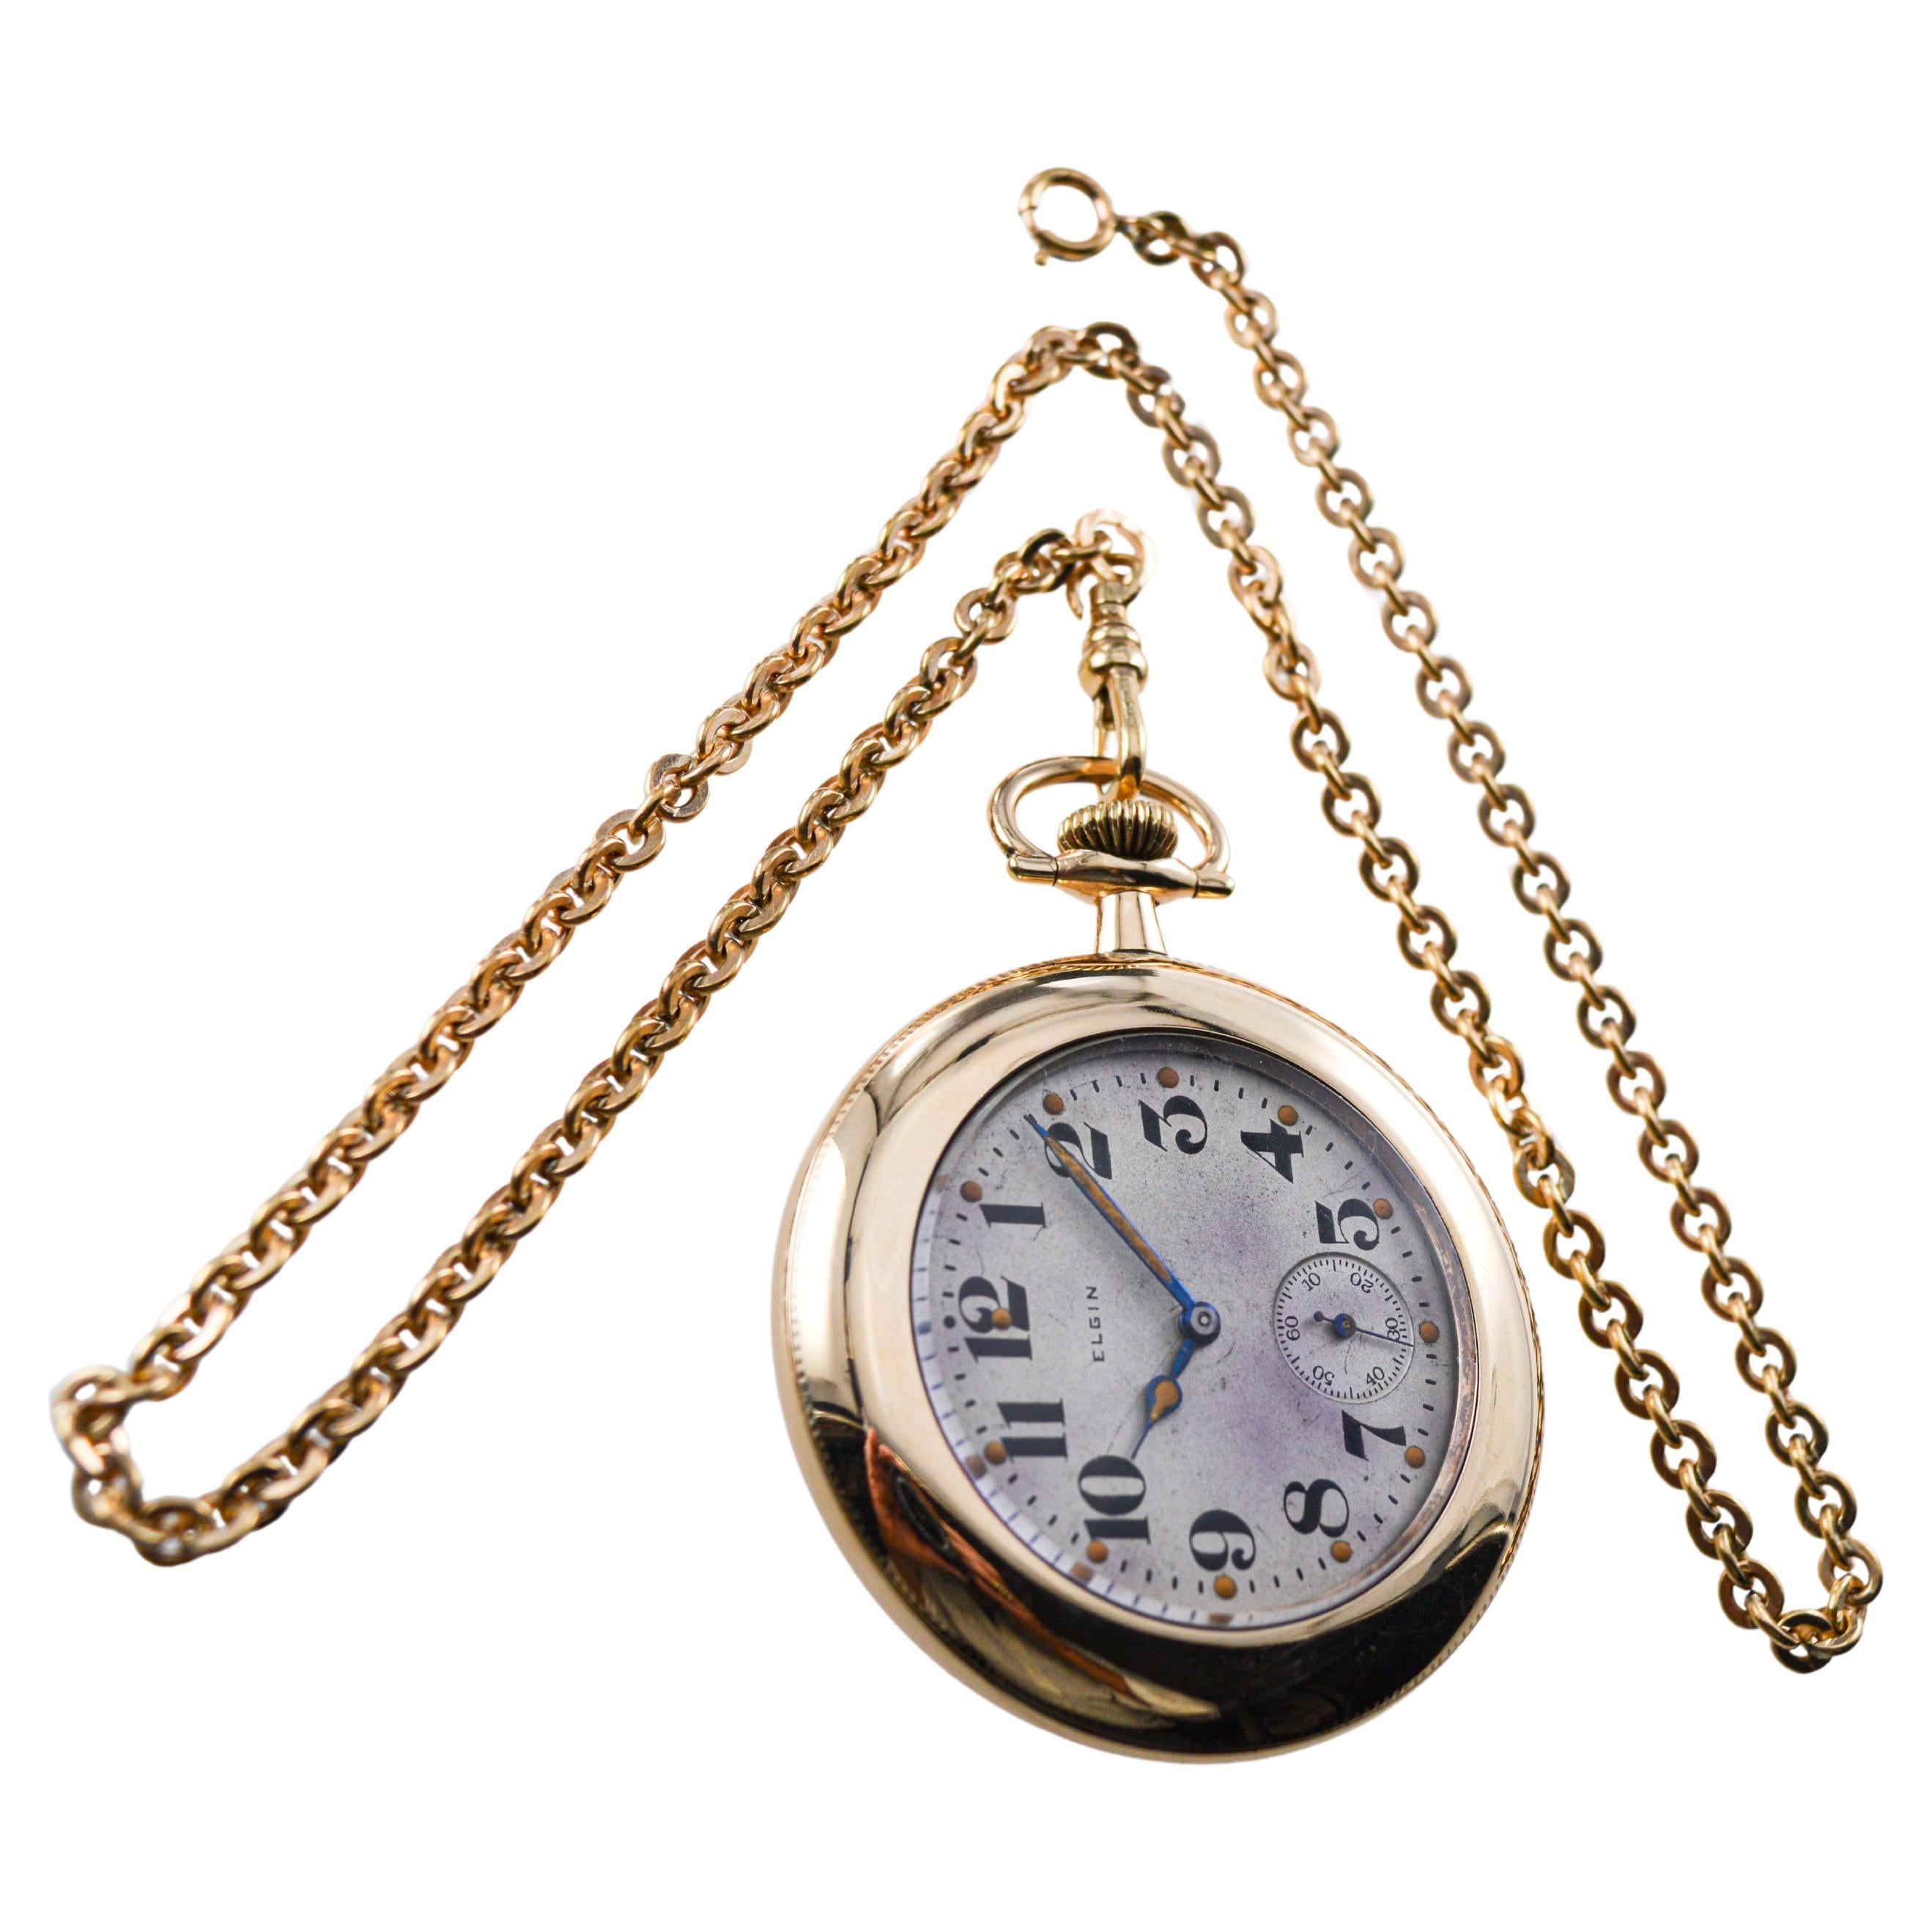 FACTORY / HOUSE: Elgin Watch Company
STYLE / REFERENCE: Open Faced Pocket Watch
METAL / MATERIAL: Yellow Gold Filled
CIRCA / YEAR: 1916
DIMENSIONS / SIZE: Diameter 47mm
MOVEMENT / CALIBER: Manual Winding / 7 Jewels / Caliber 12 Size
DIAL / HANDS: